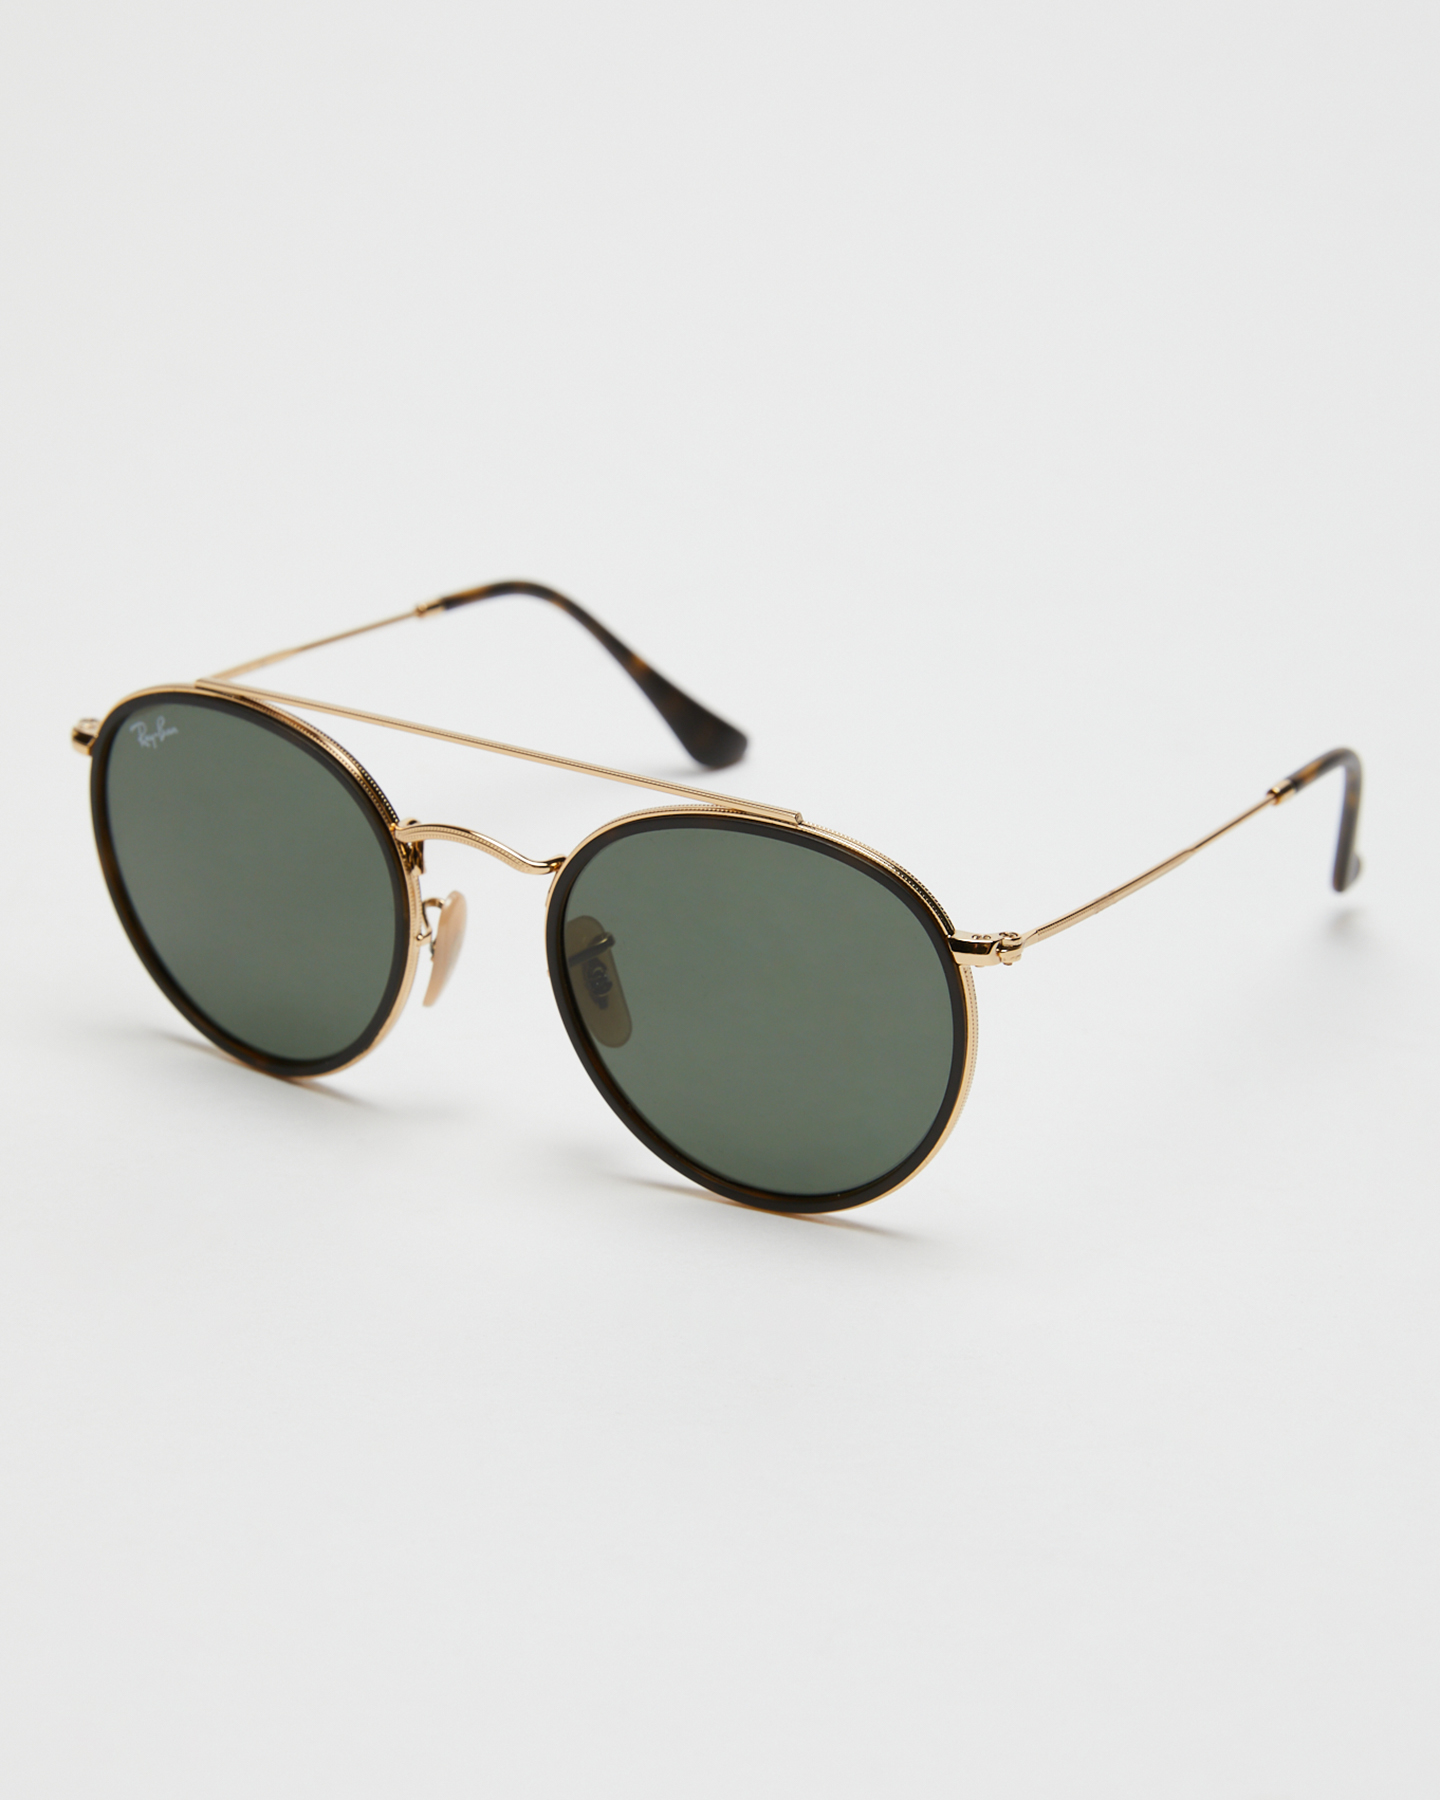 Ray-Ban Round Double Bridge - Gold Green Classic | SurfStitch